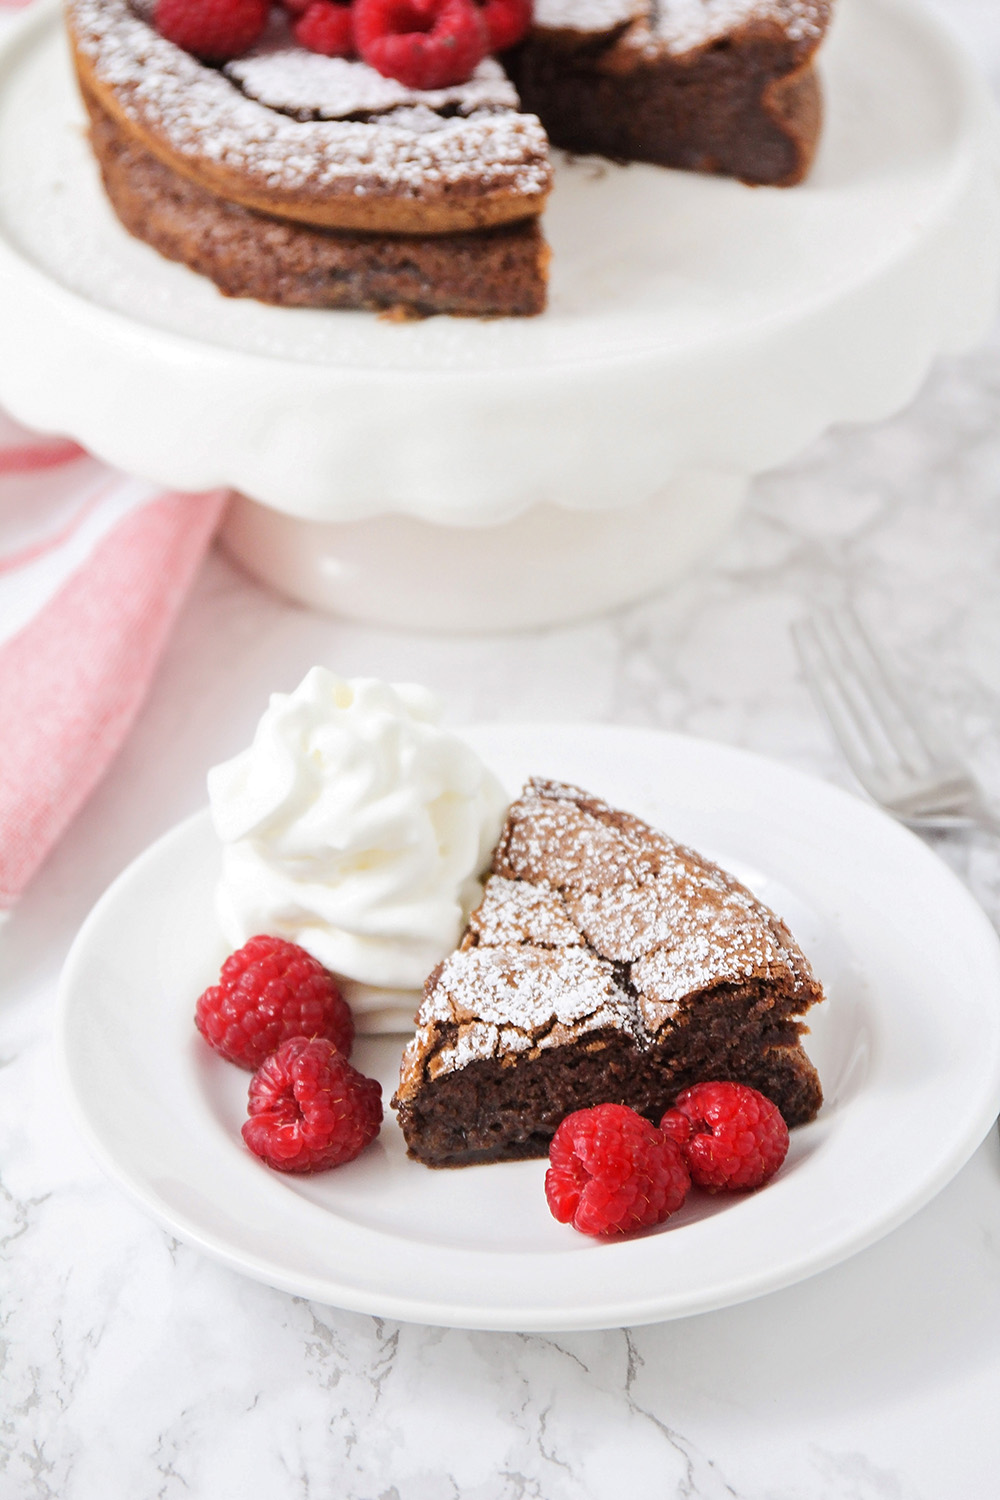 This luscious and decadent flourless chocolate cake is as simple as it is delicious!